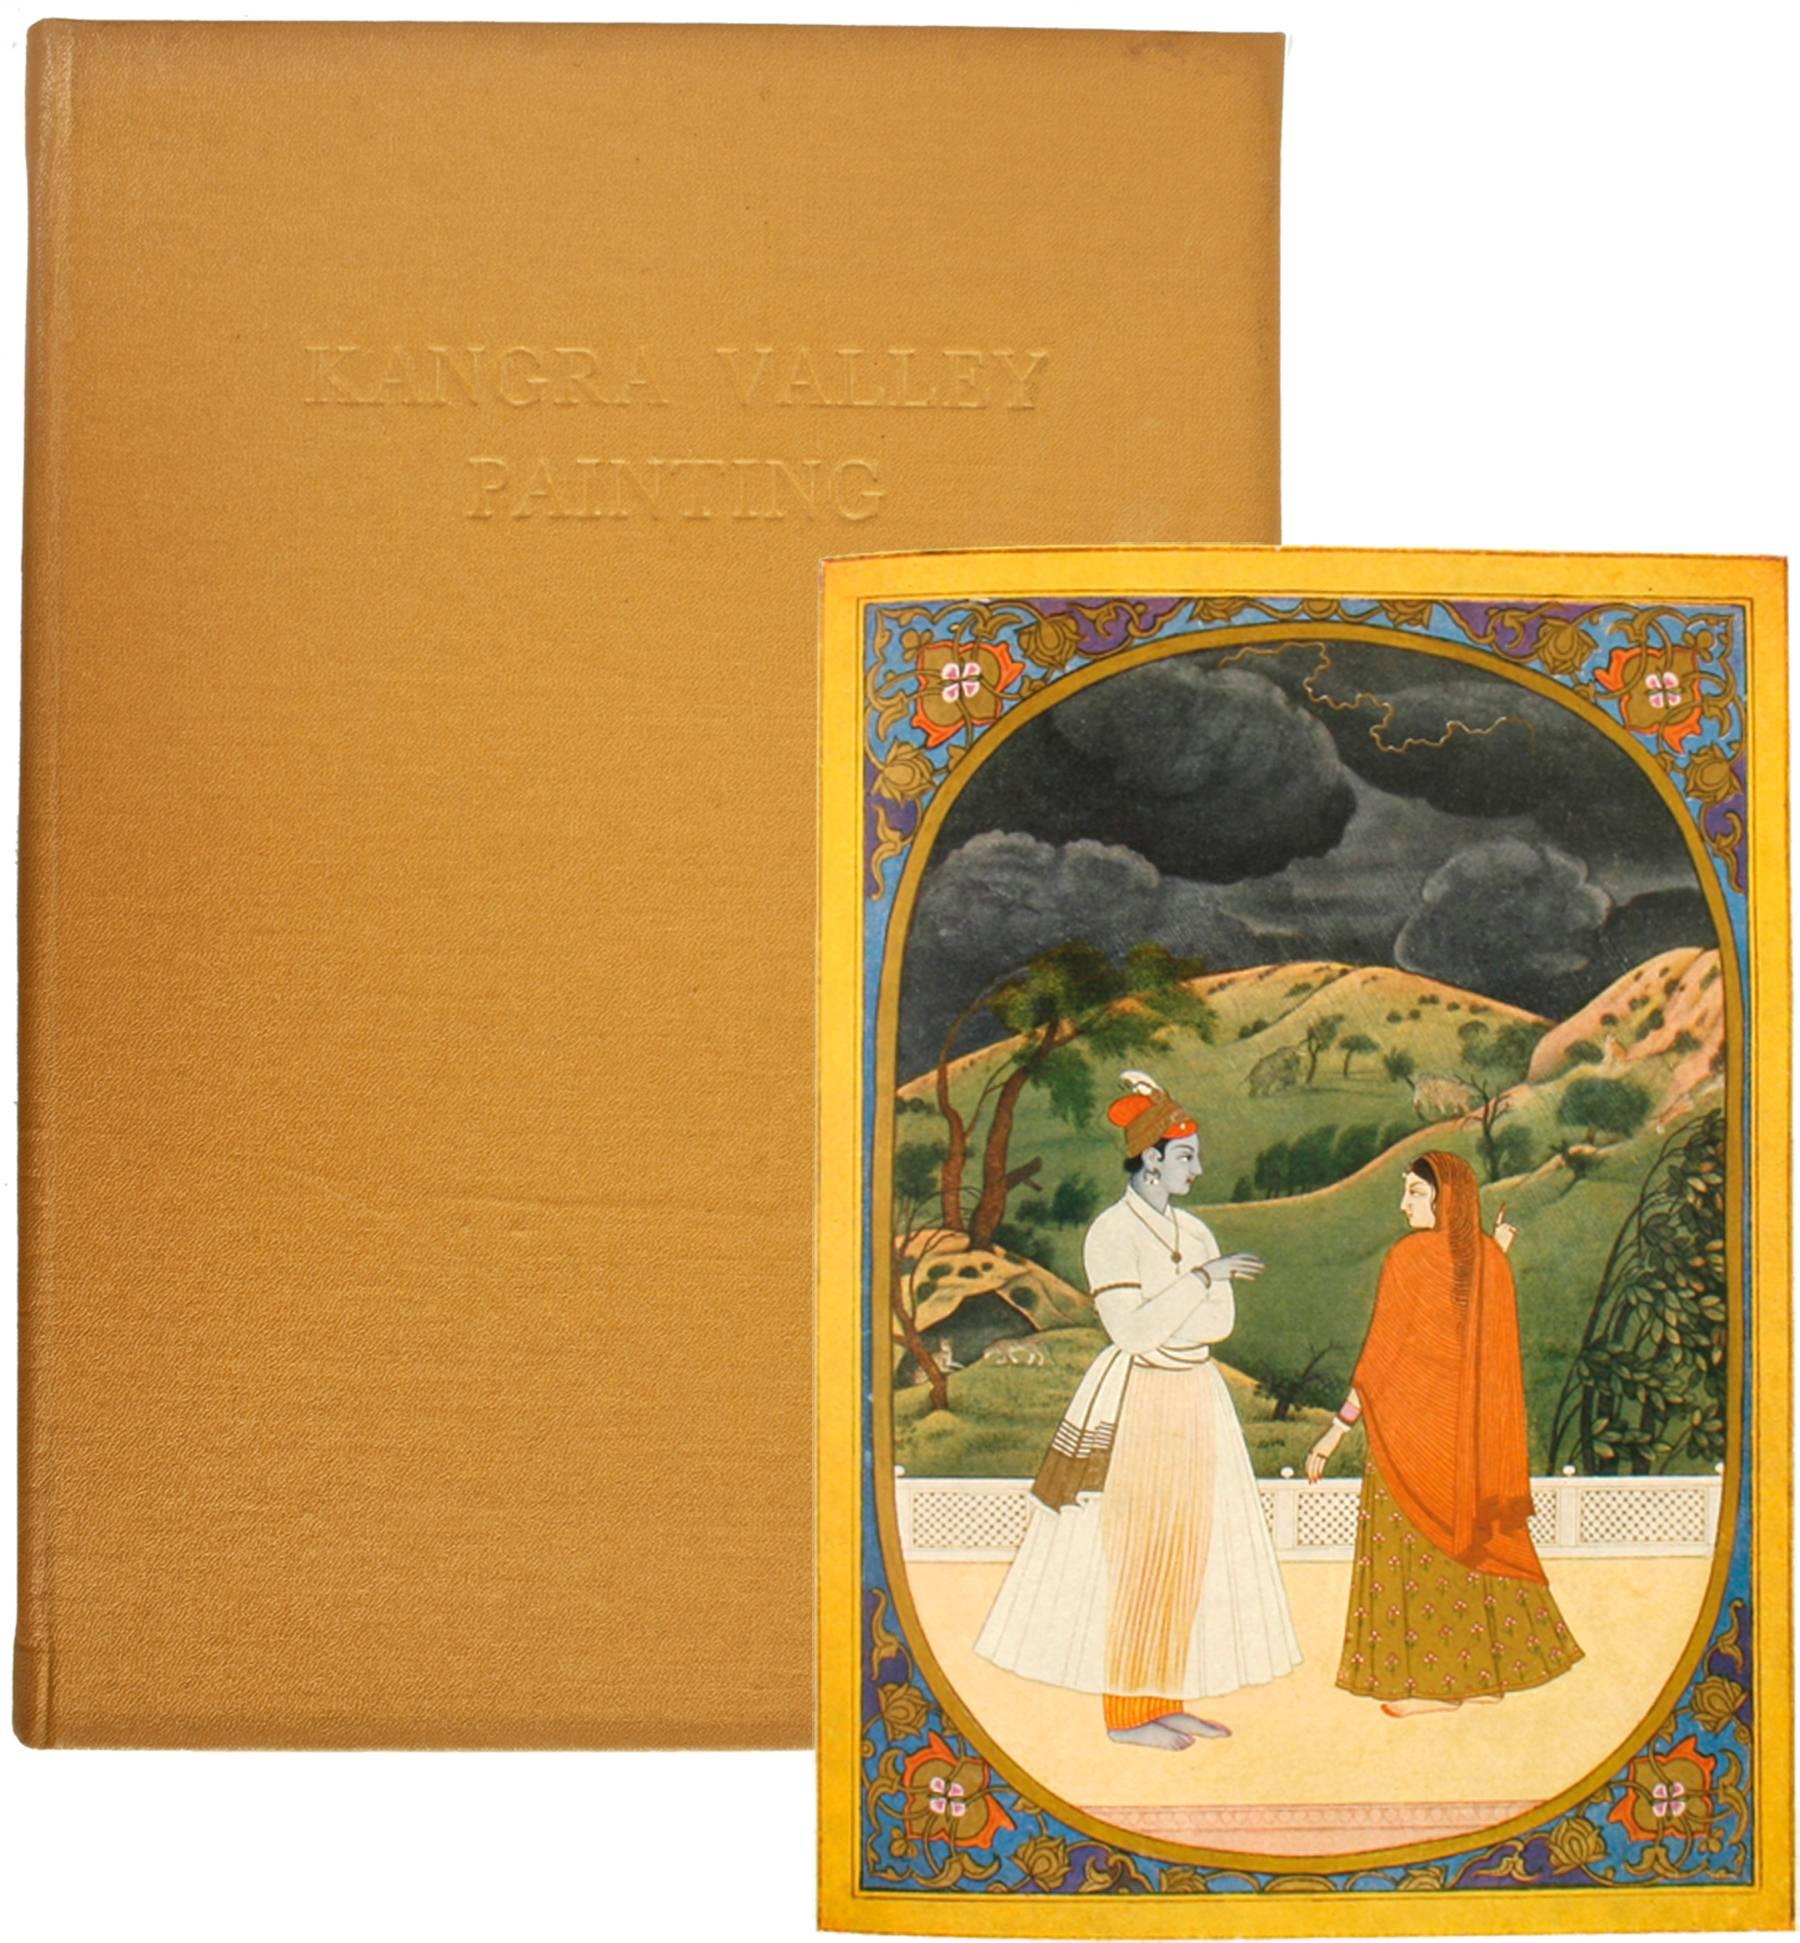 Kangra Valley Painting by M. S. Randhawa. The Publications Division, Ministry of Information and Broadcasting, Government of India, 1954. Hardcover. 17 pp of text and a frontispiece map, with 40, full color and gilt decorated plates with printed